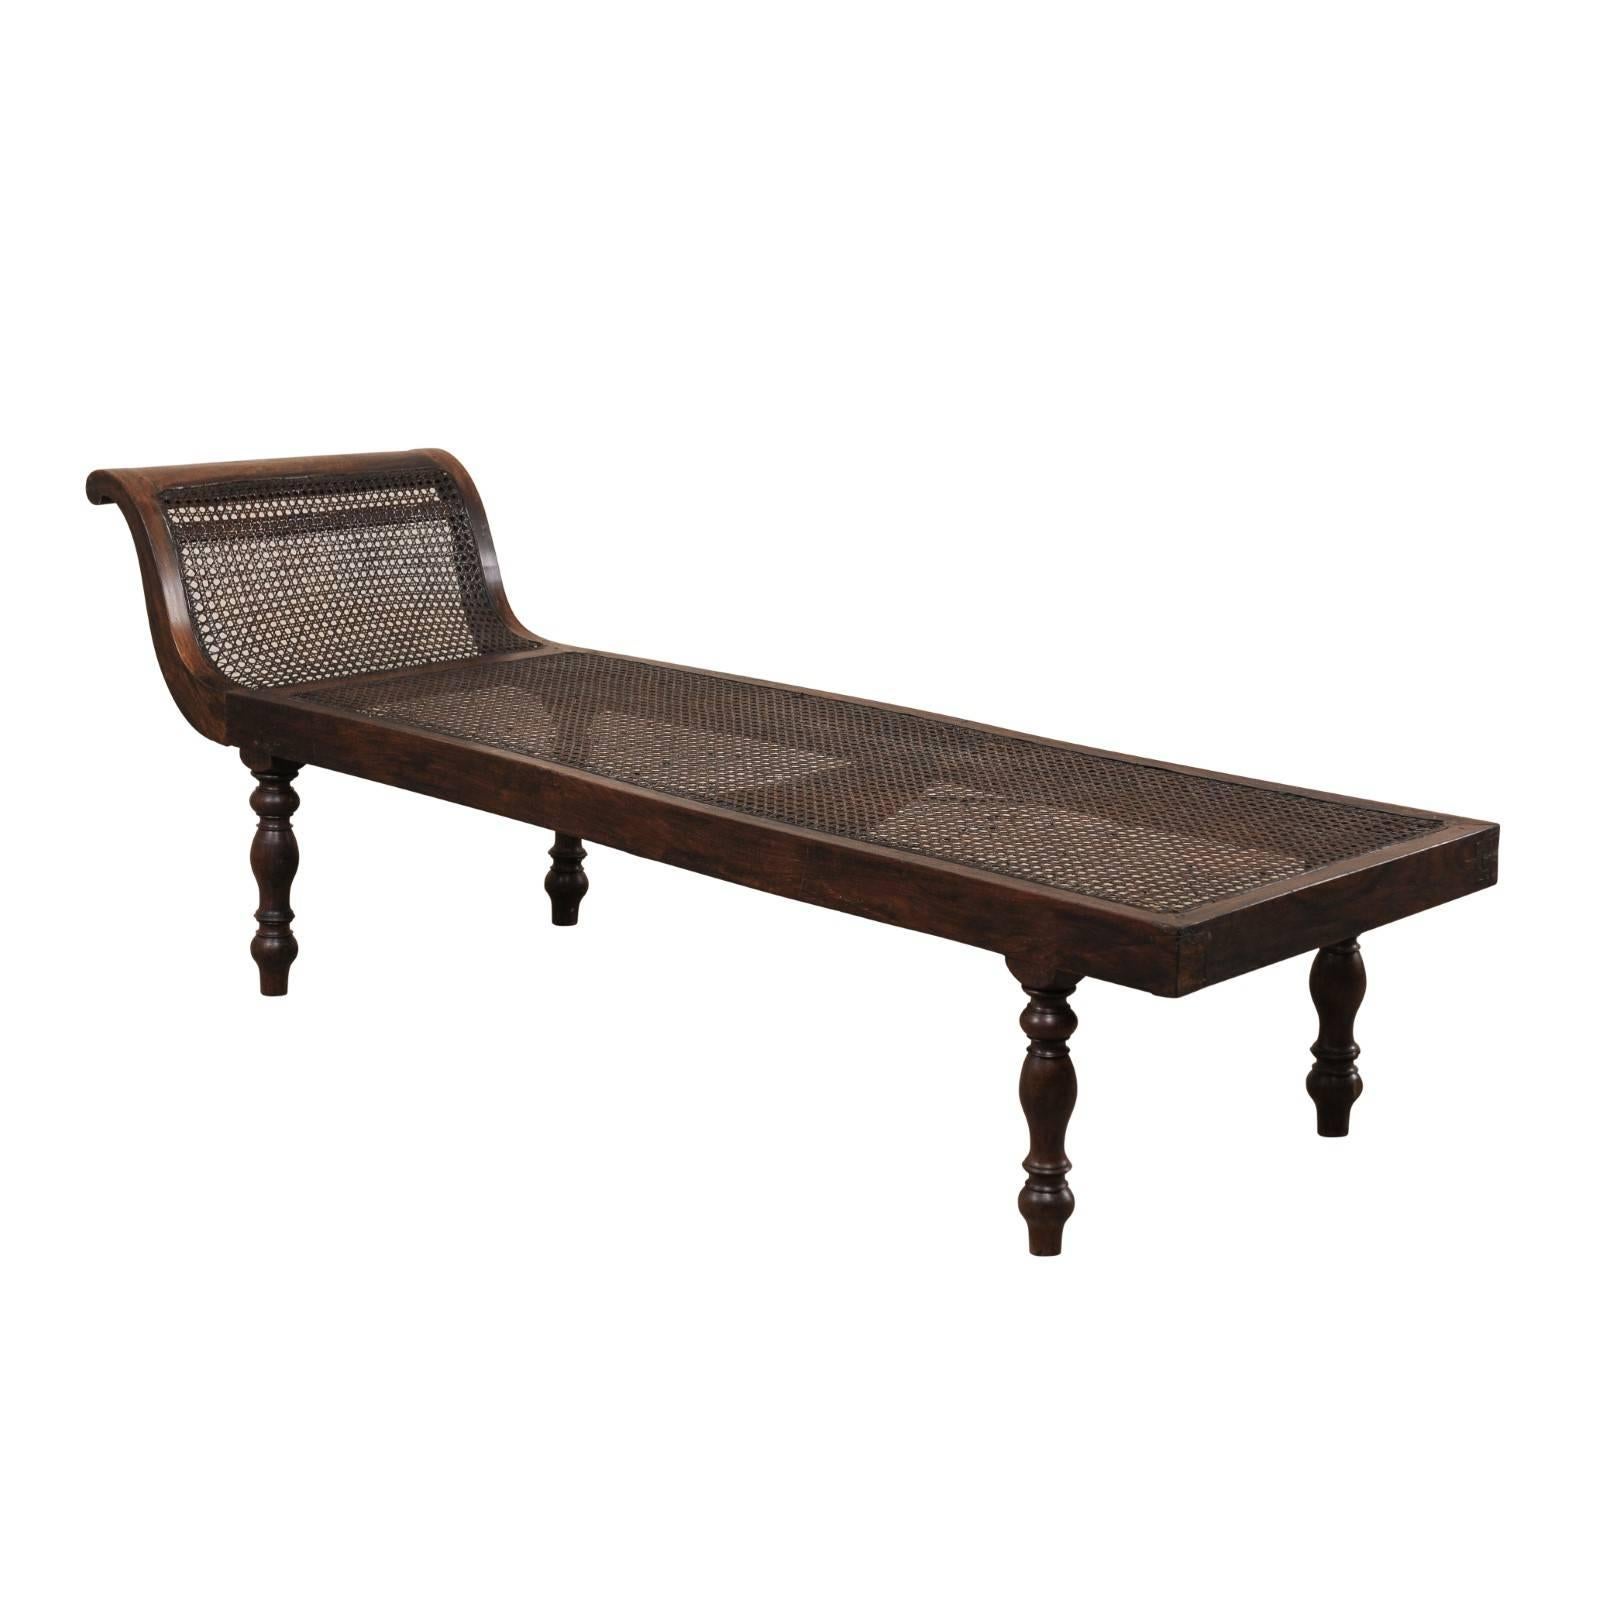 Turn of the Century British Colonial Wood Chaise Longue with Caned Back